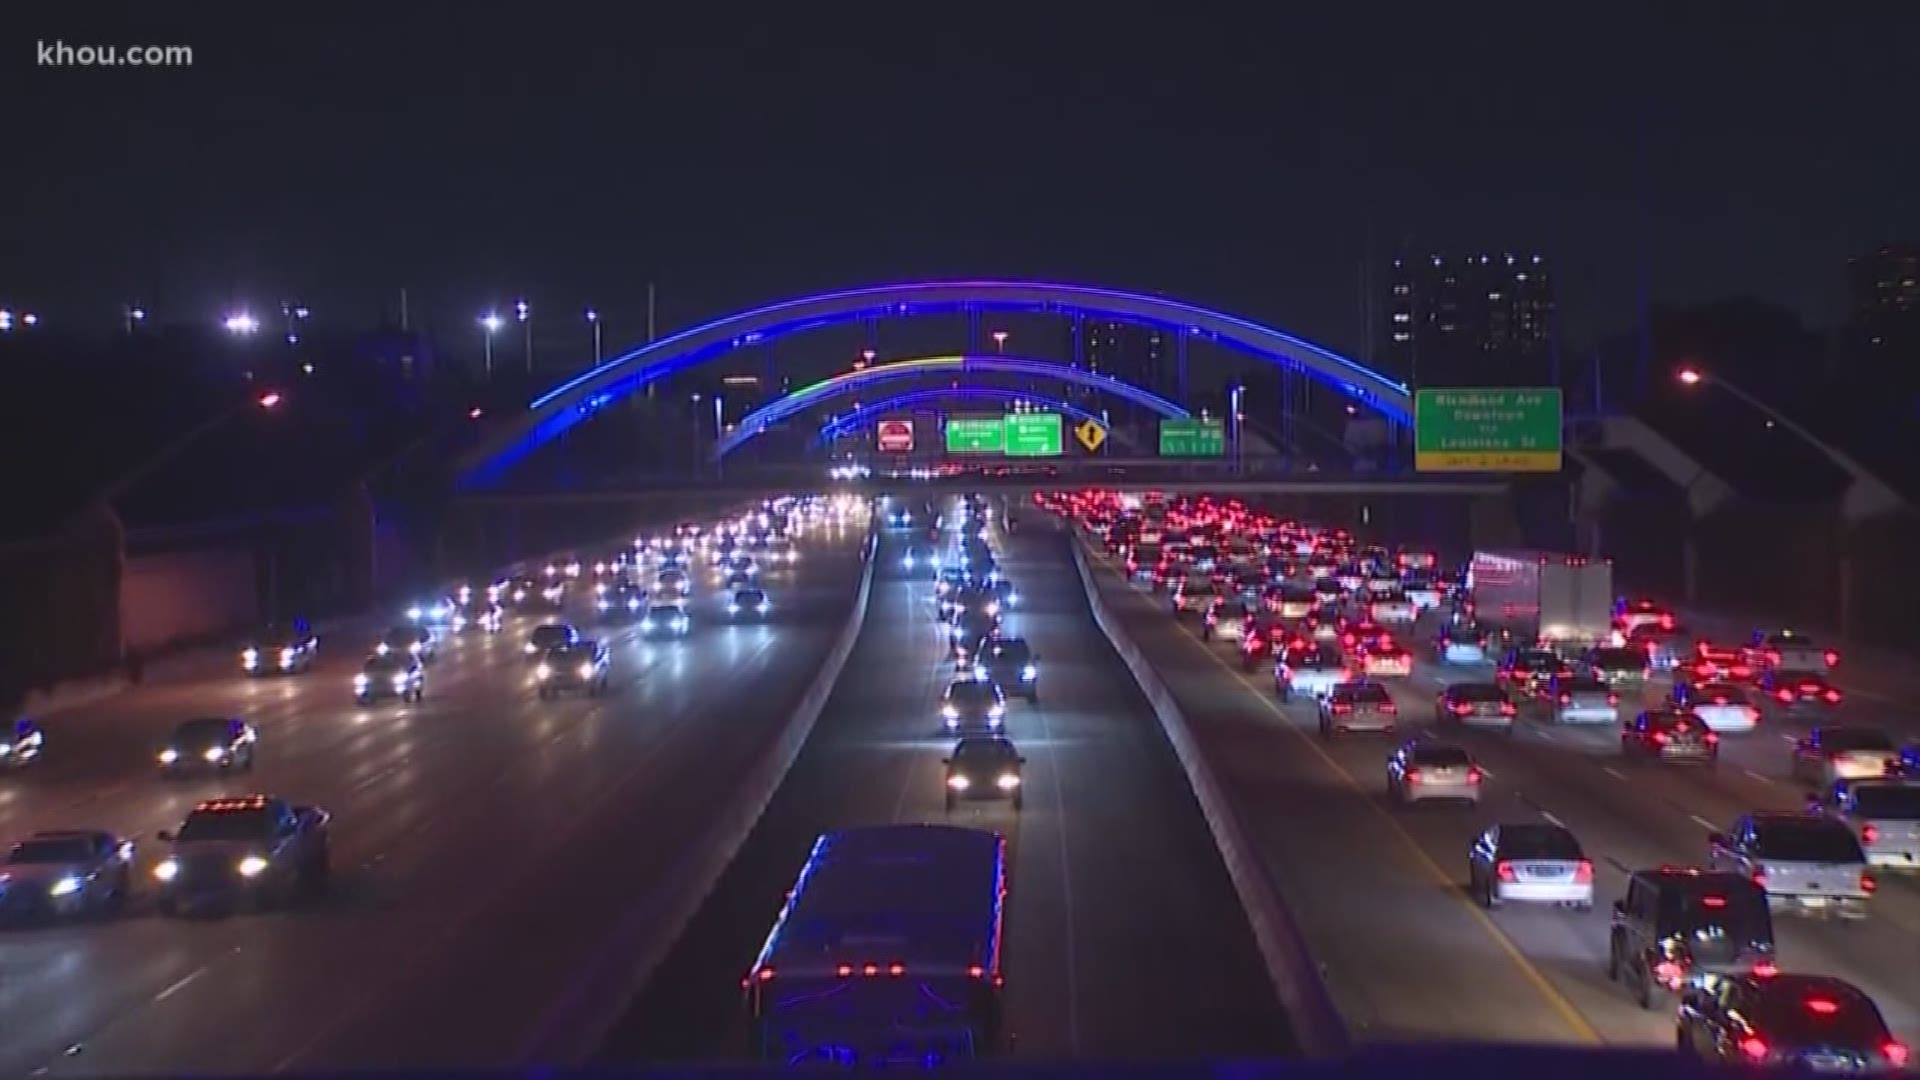 Some big changes could be just down the road for drivers as METRO considers a plan to raise toll prices and increase the number of passengers required for HOV lanes.